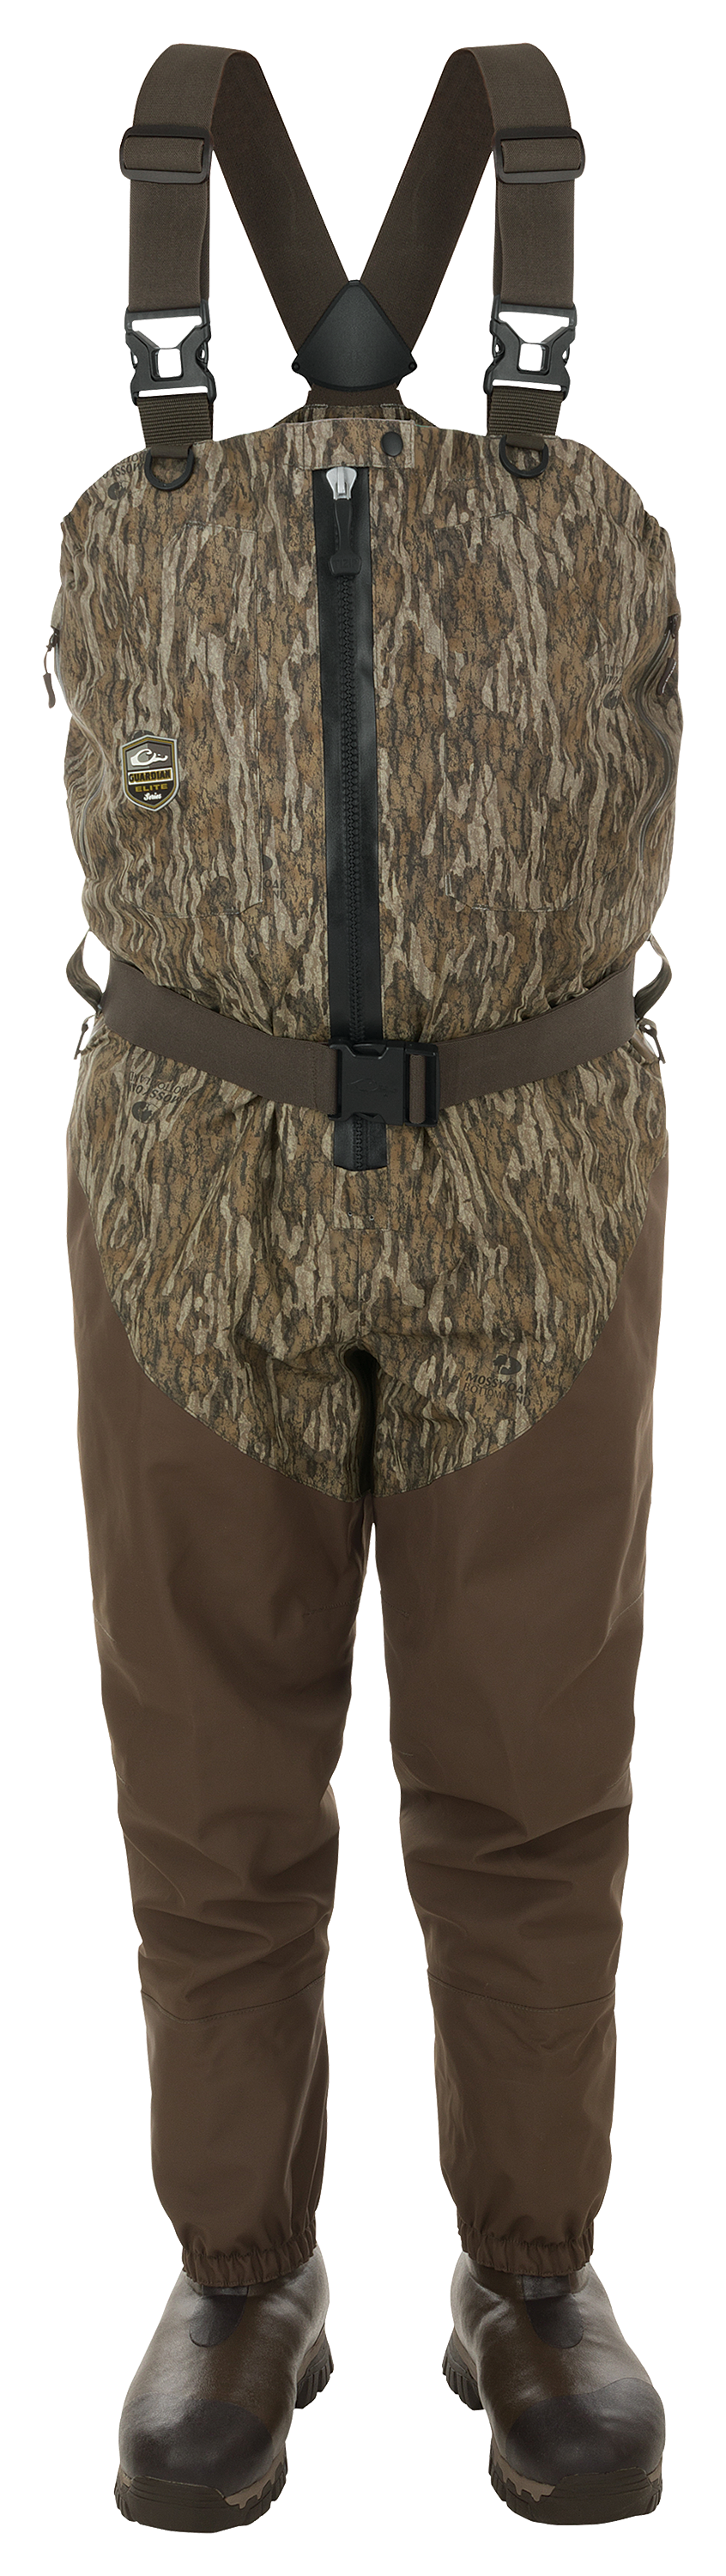 Drake Waterfowl Systems Guardian Elite Front Zip Breathable Waders for Men - Mossy Oak Bottomland - 13/XX Large